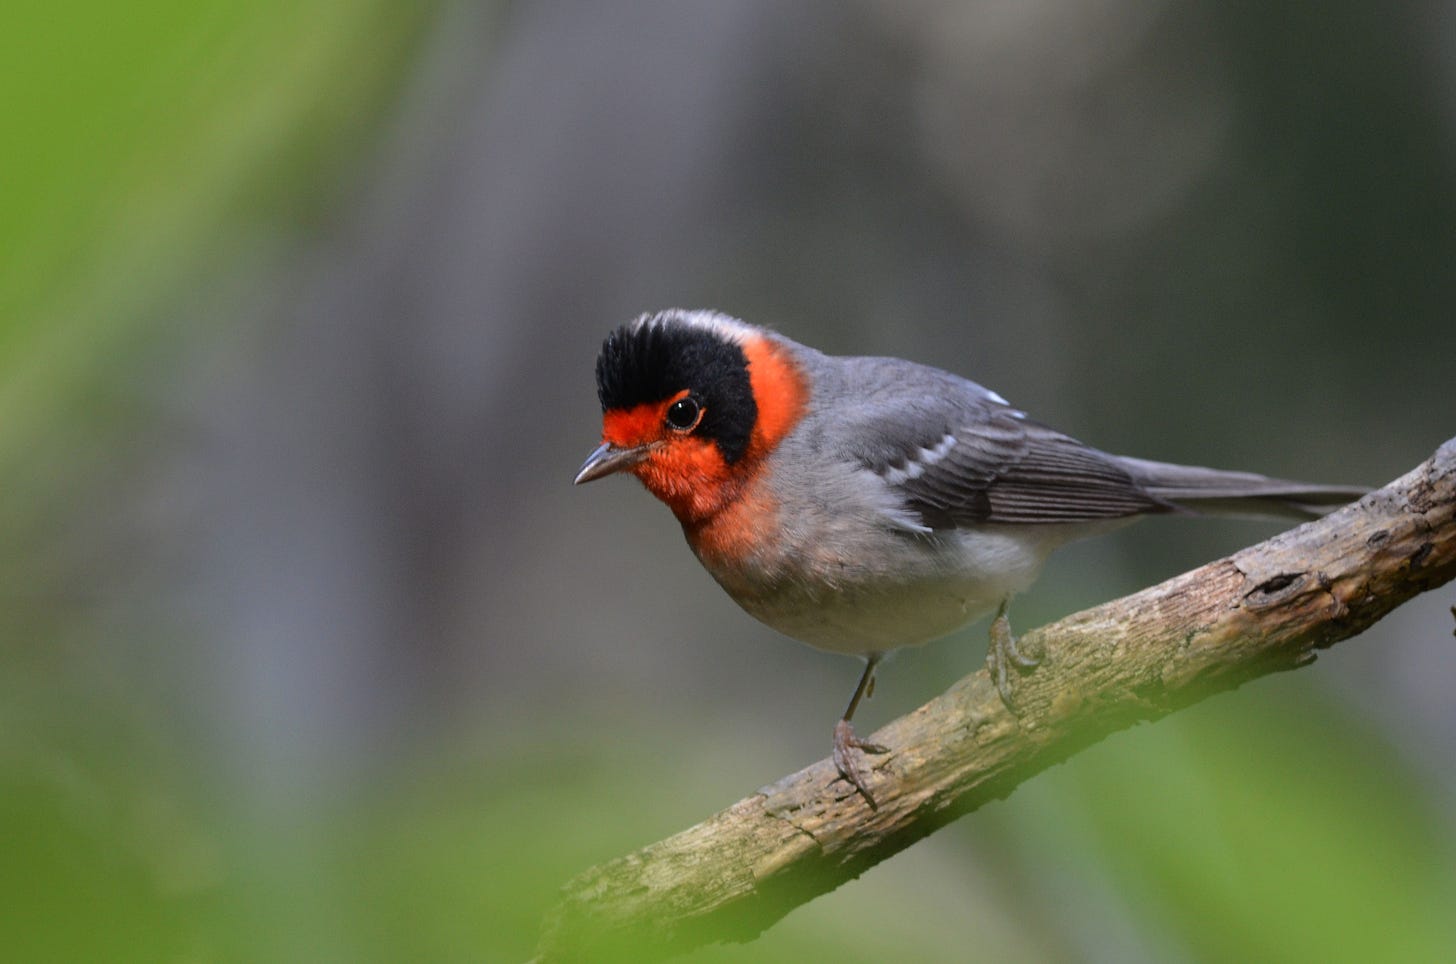 File:Chipe Cara Roja, Red Faced Warbler, Cardellina rubrifrons  (16854176538).jpg - Wikimedia Commons